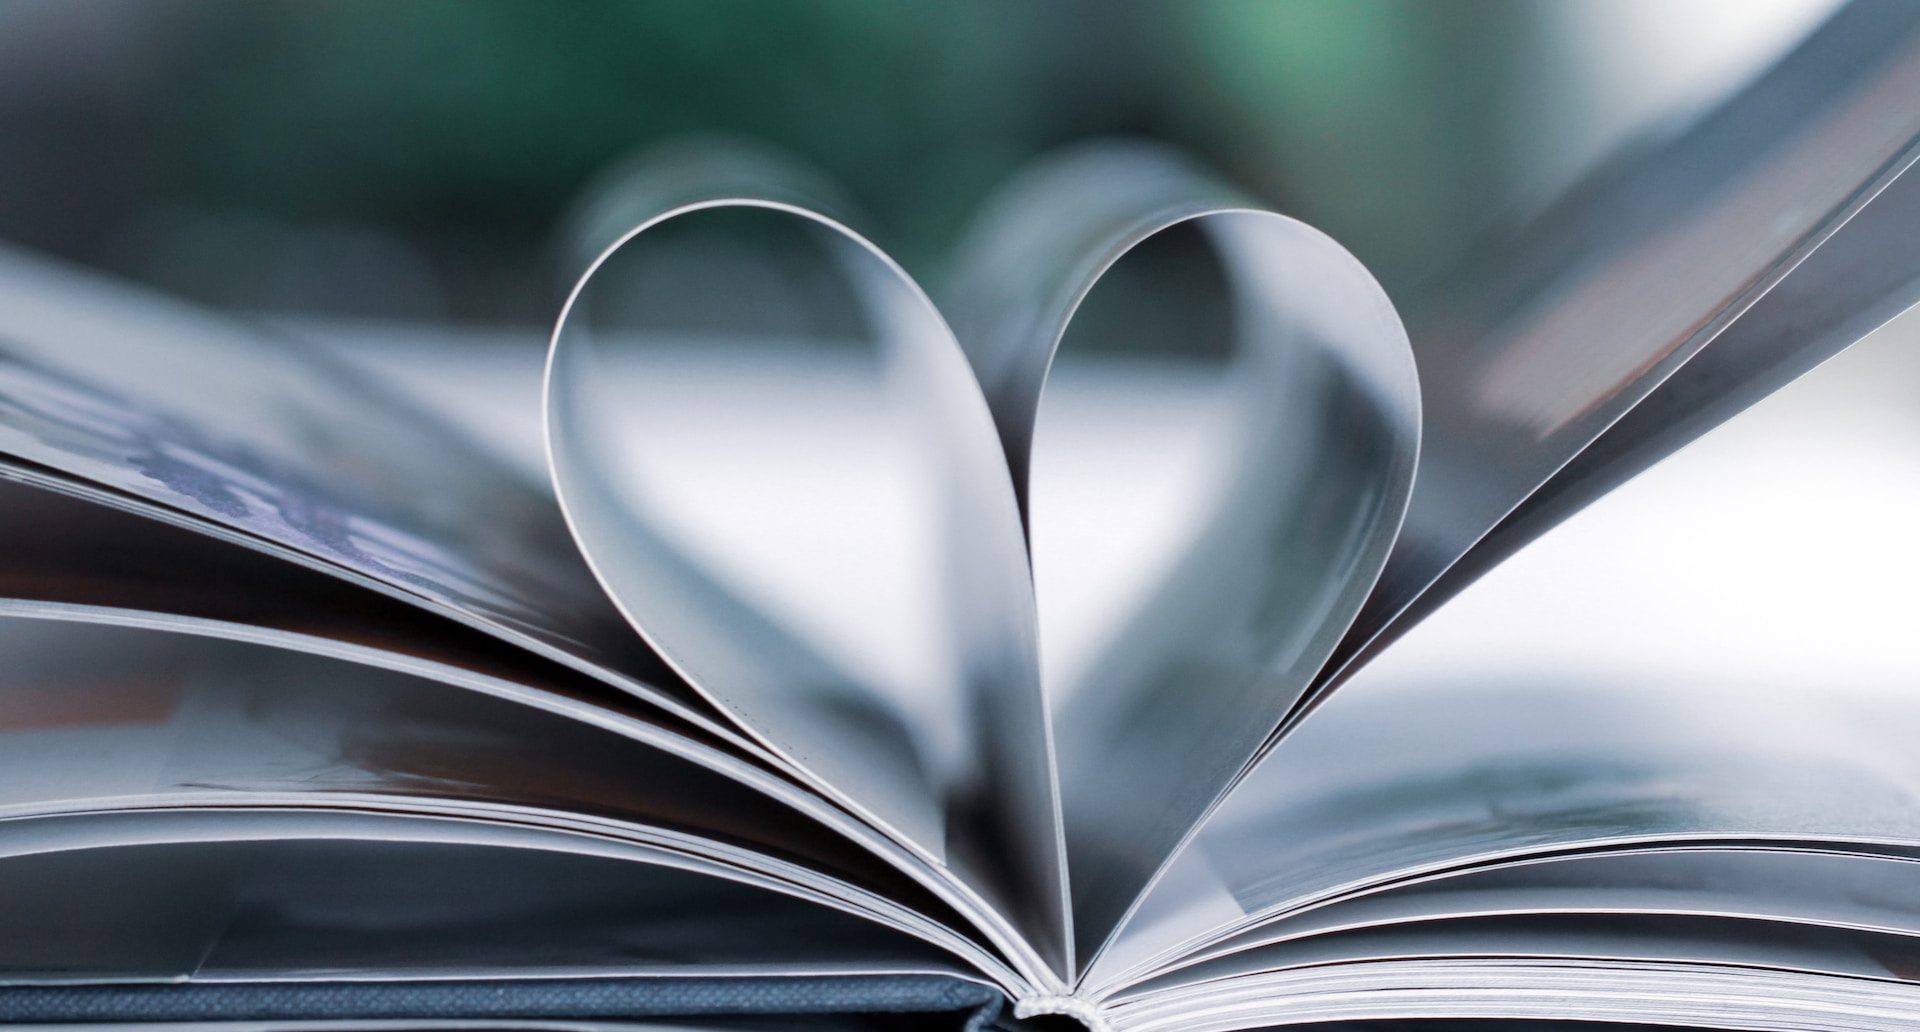 A book with pages folded into the shape of a heart